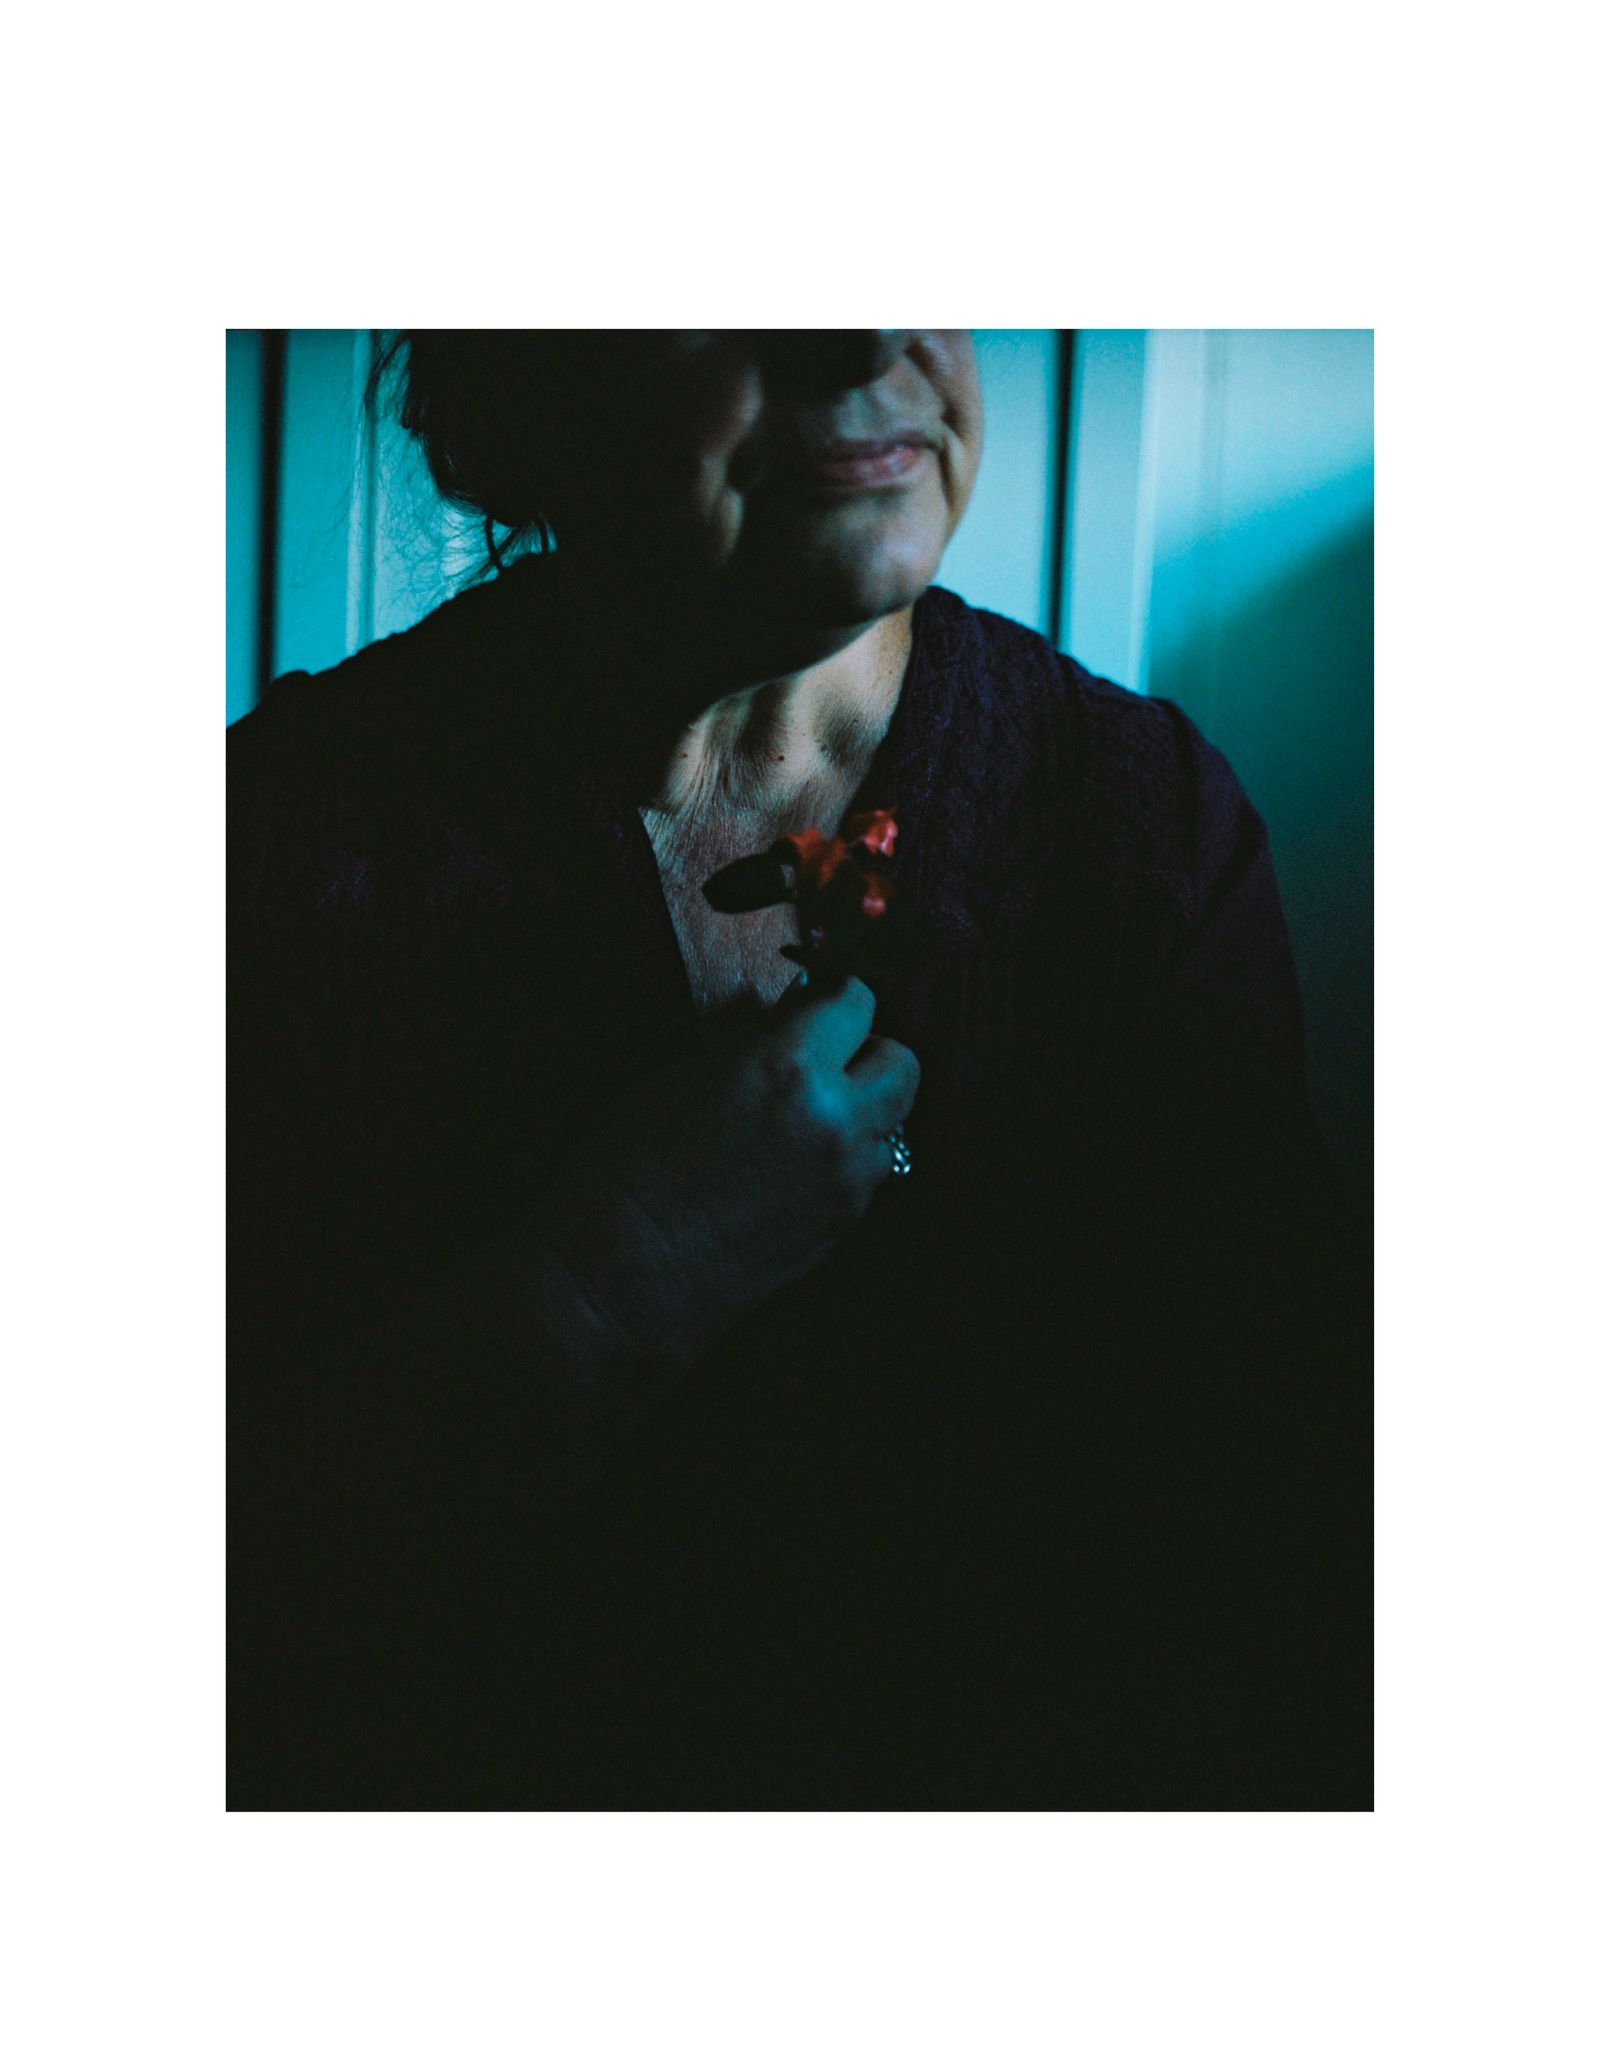 © Morganna Magee - Image from the All the things unsaid photography project